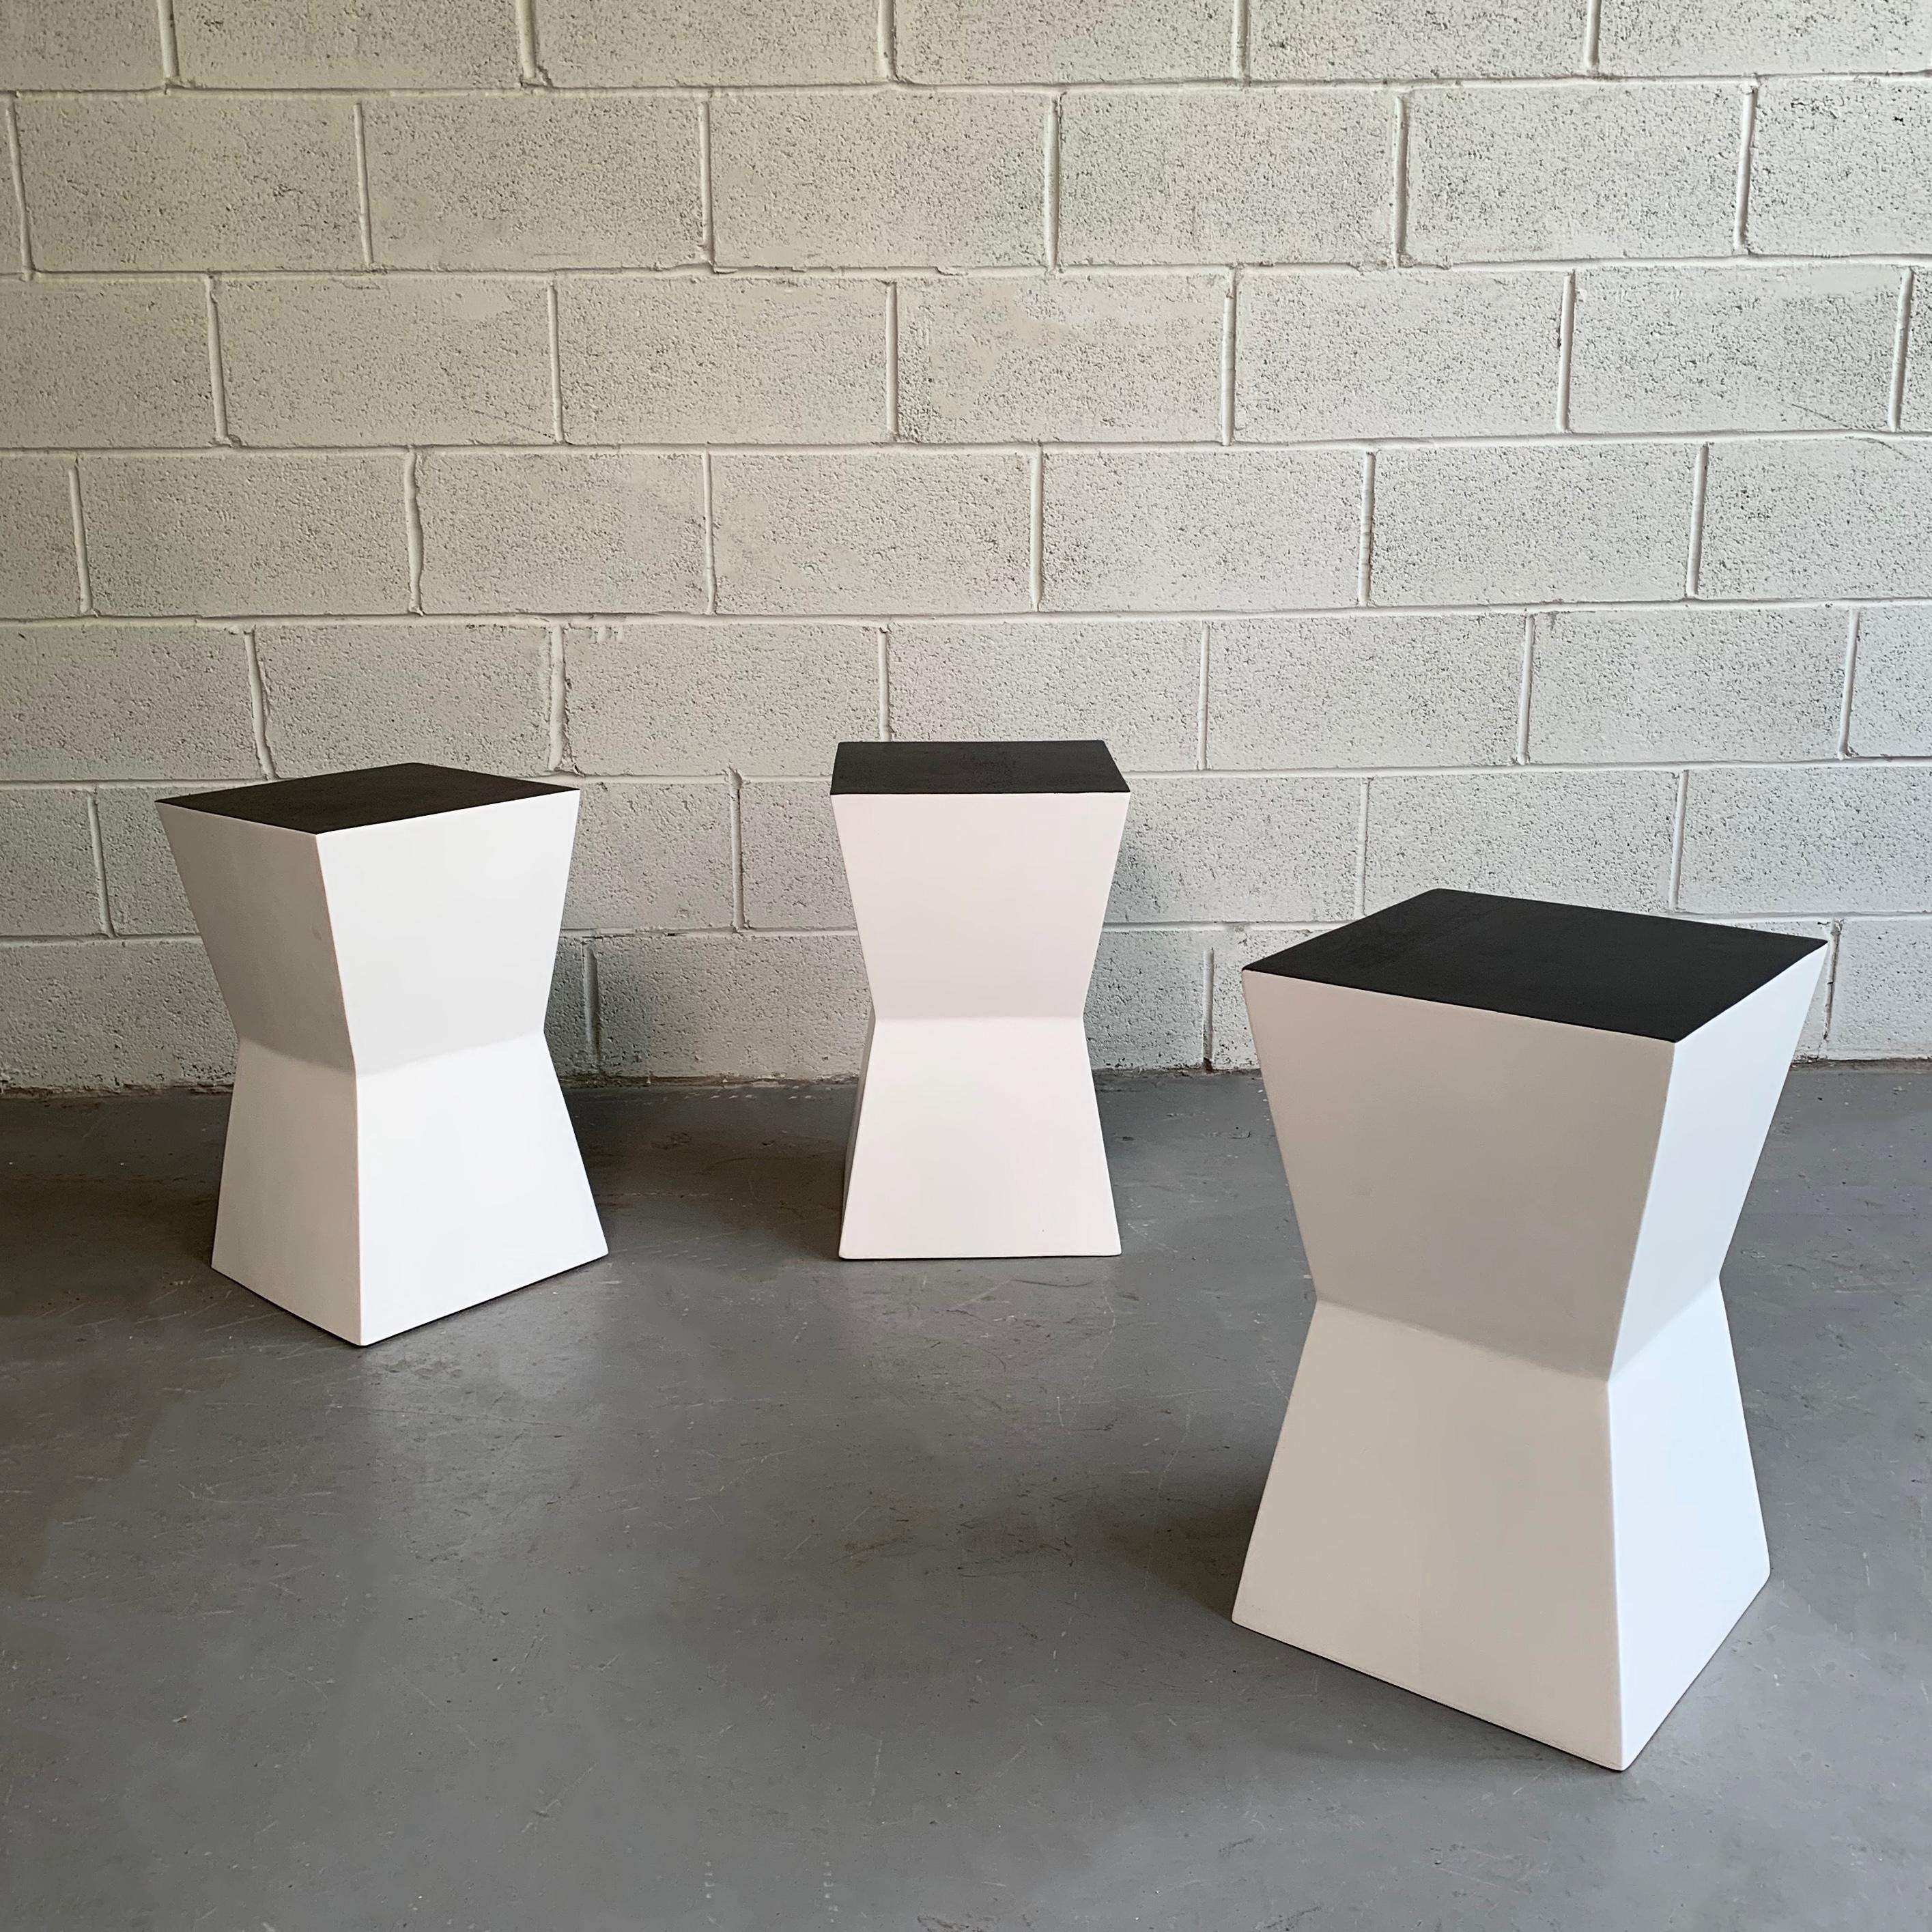 Set of 3, striking, modernist, geometric forms that can be used as stools or stands in graphic, lacquered black and white.